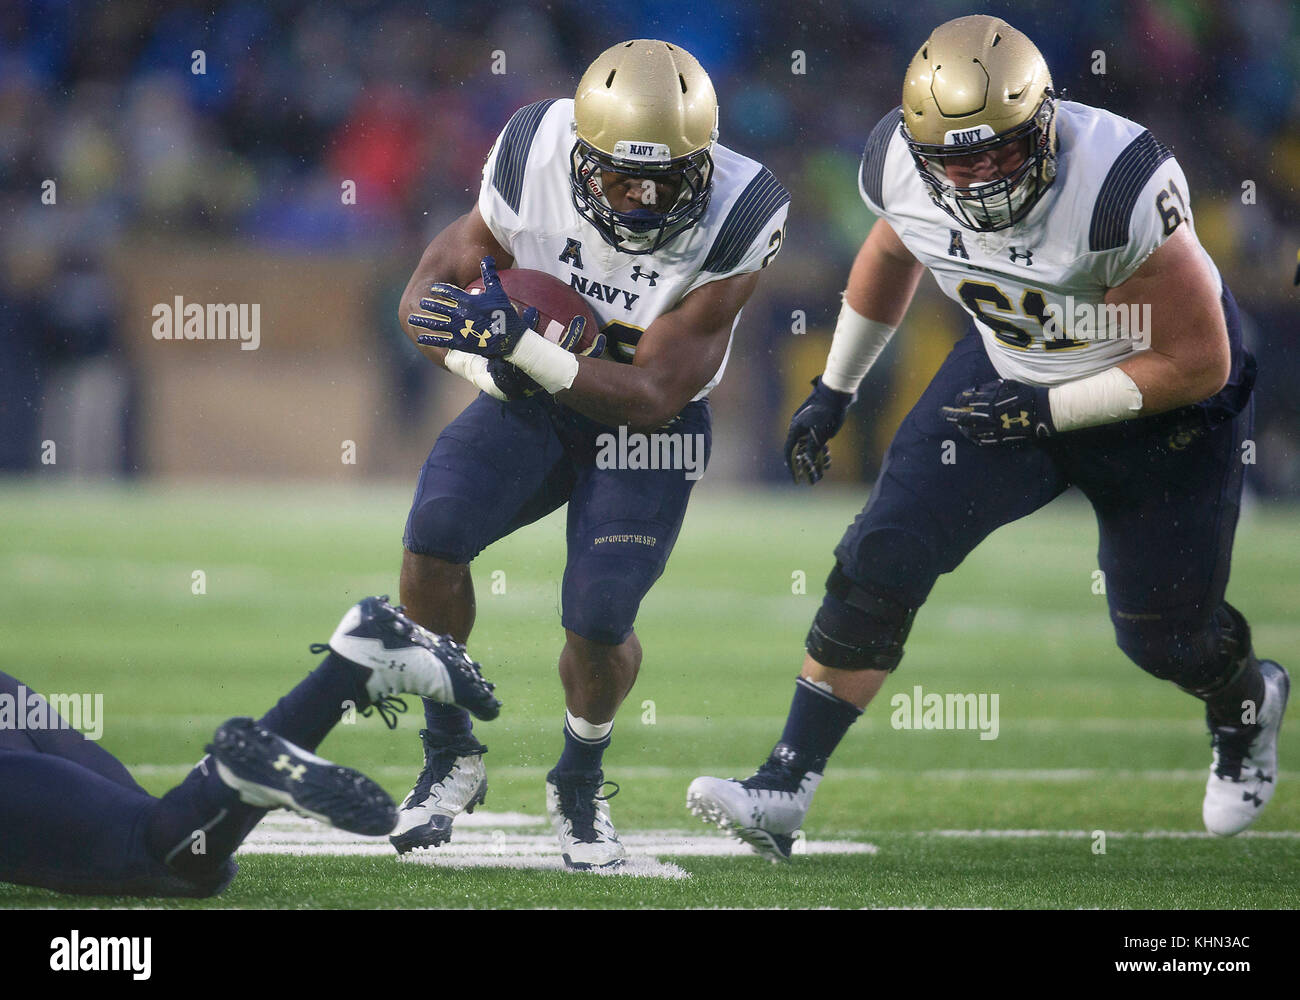 South Bend, Indiana, USA. 18th Nov, 2017. Navy running back Josh Brown (28) runs with the ball as Navy offensive lineman Andrew Wood (61) leads the way during NCAA football game action between the Navy Midshipmen and the Notre Dame Fighting Irish at Notre Dame Stadium in South Bend, Indiana. Notre Dame defeated Navy 24-17. John Mersits/CSM/Alamy Live News Stock Photo